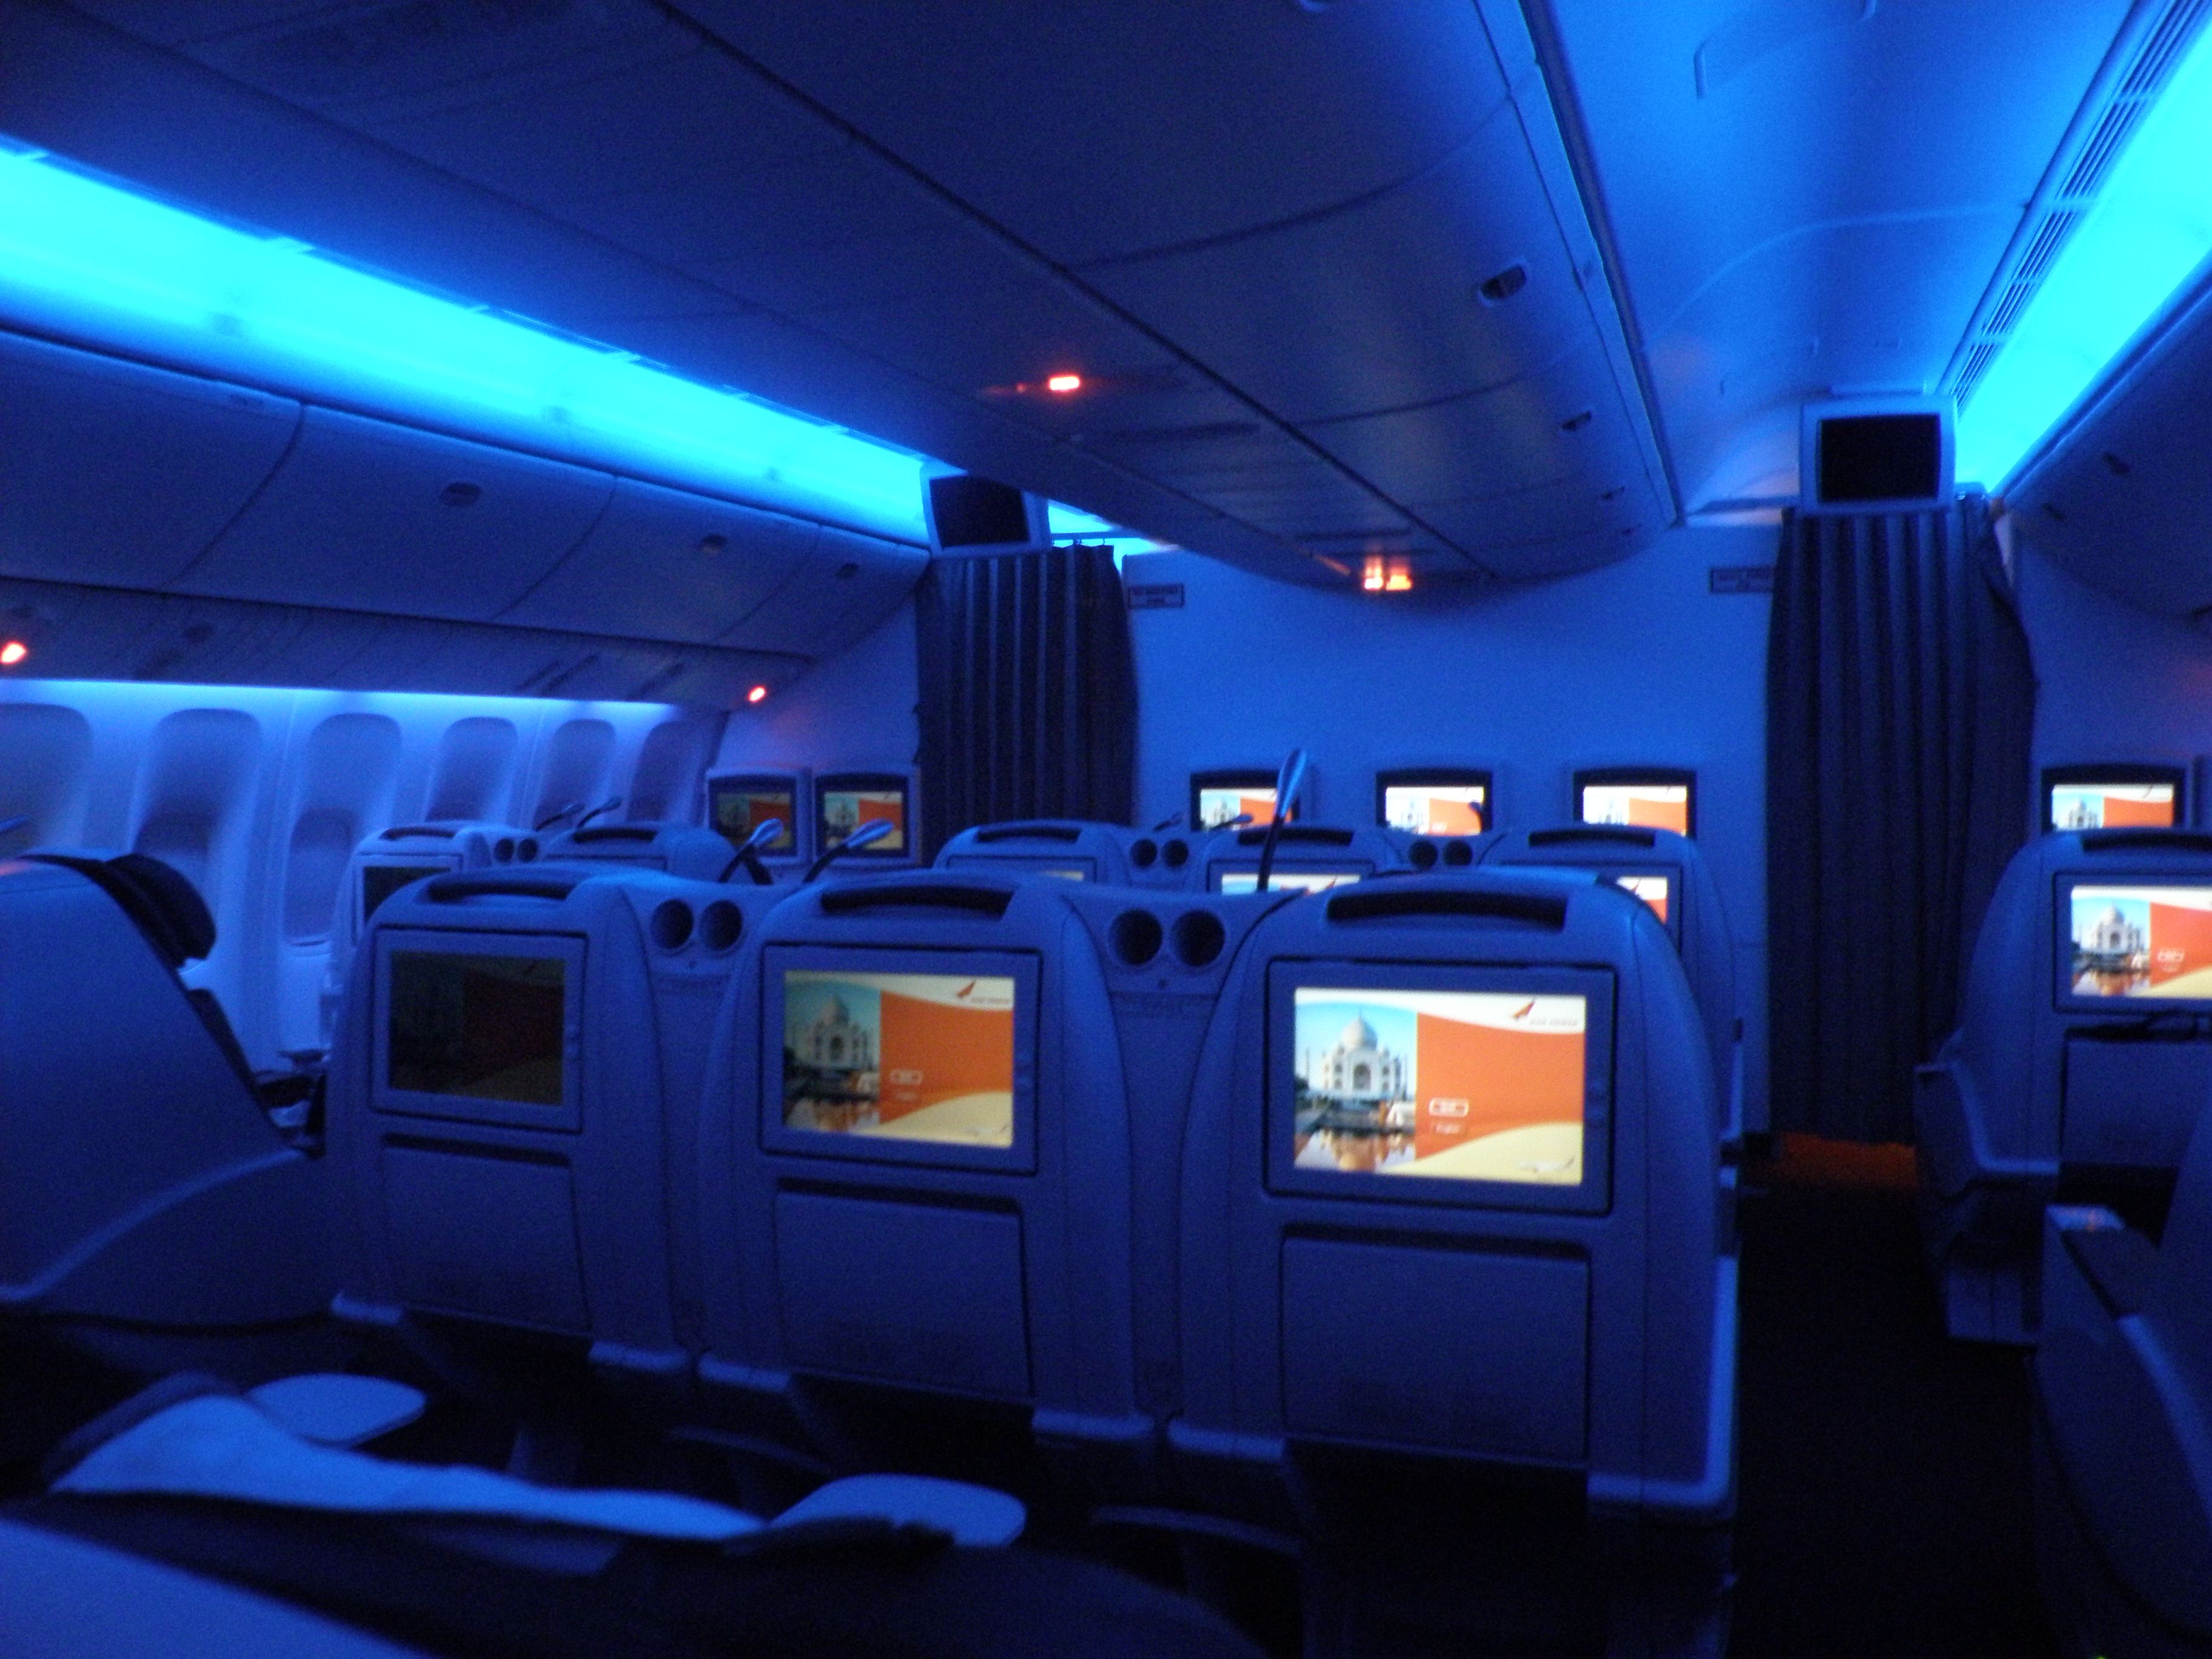 Air India Business Class cabin